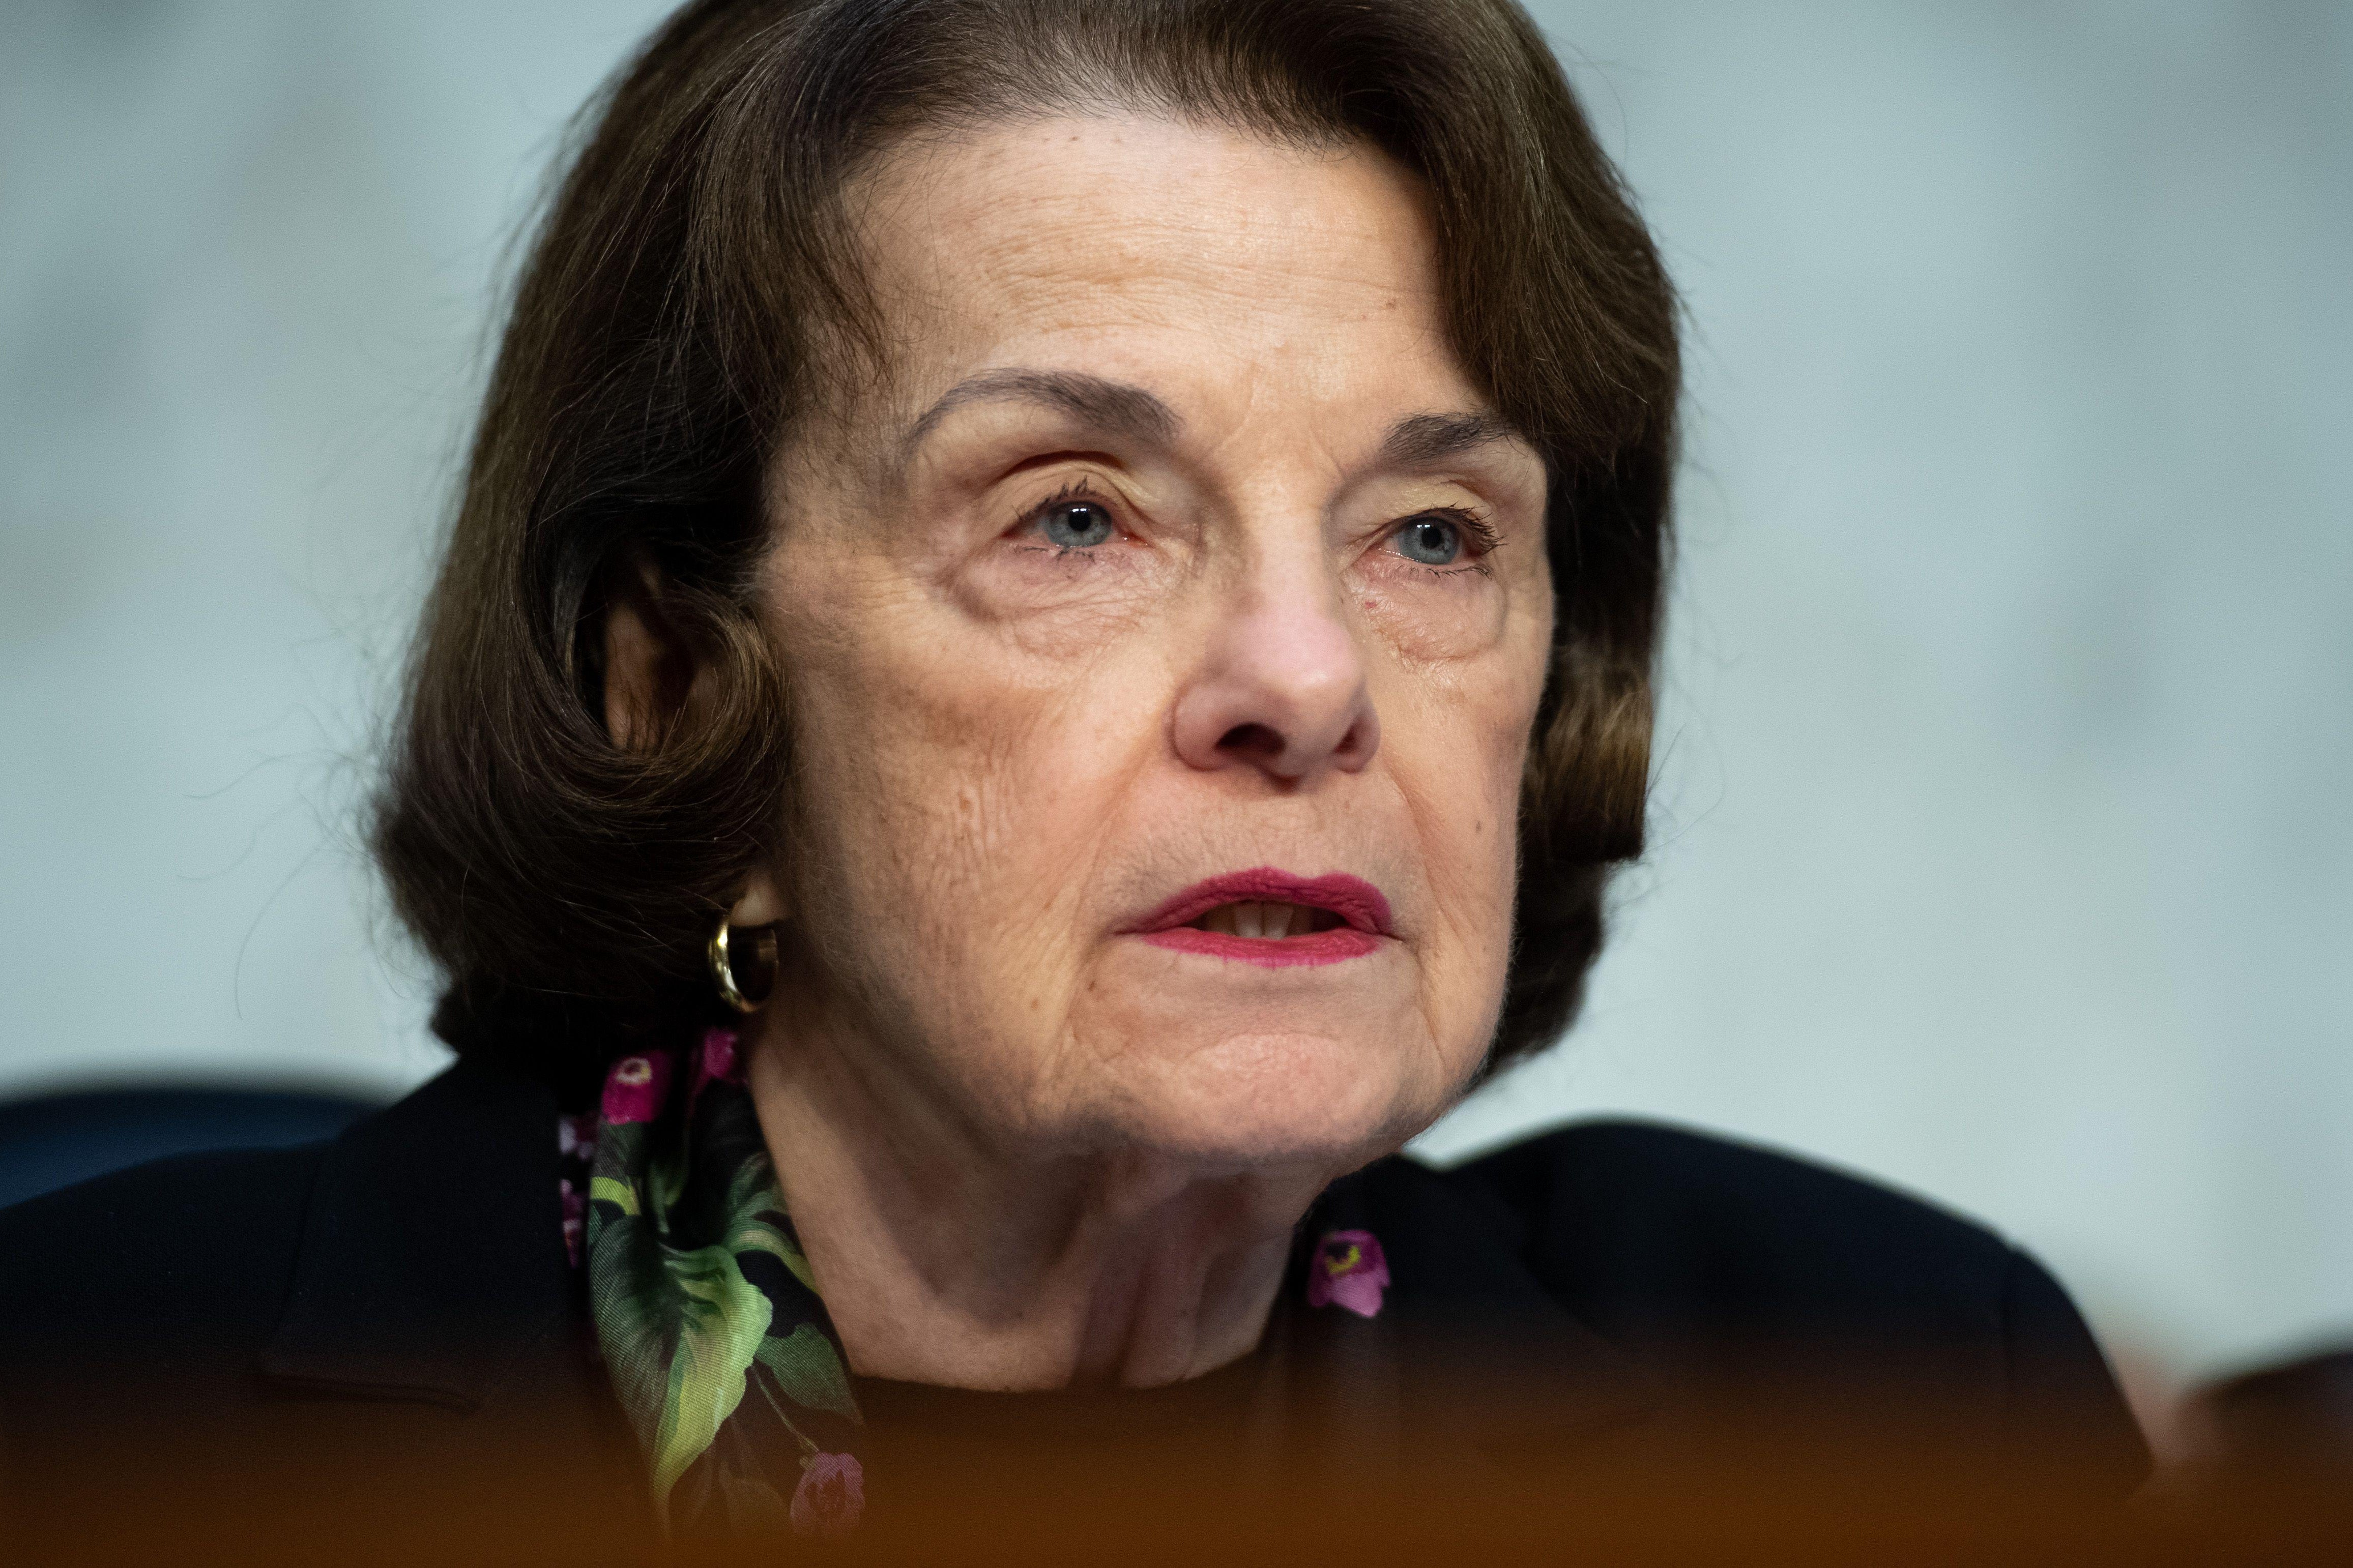 The Slatest for Sept. 29: The Questions Dianne Feinstein Leaves Behind Slate Staff